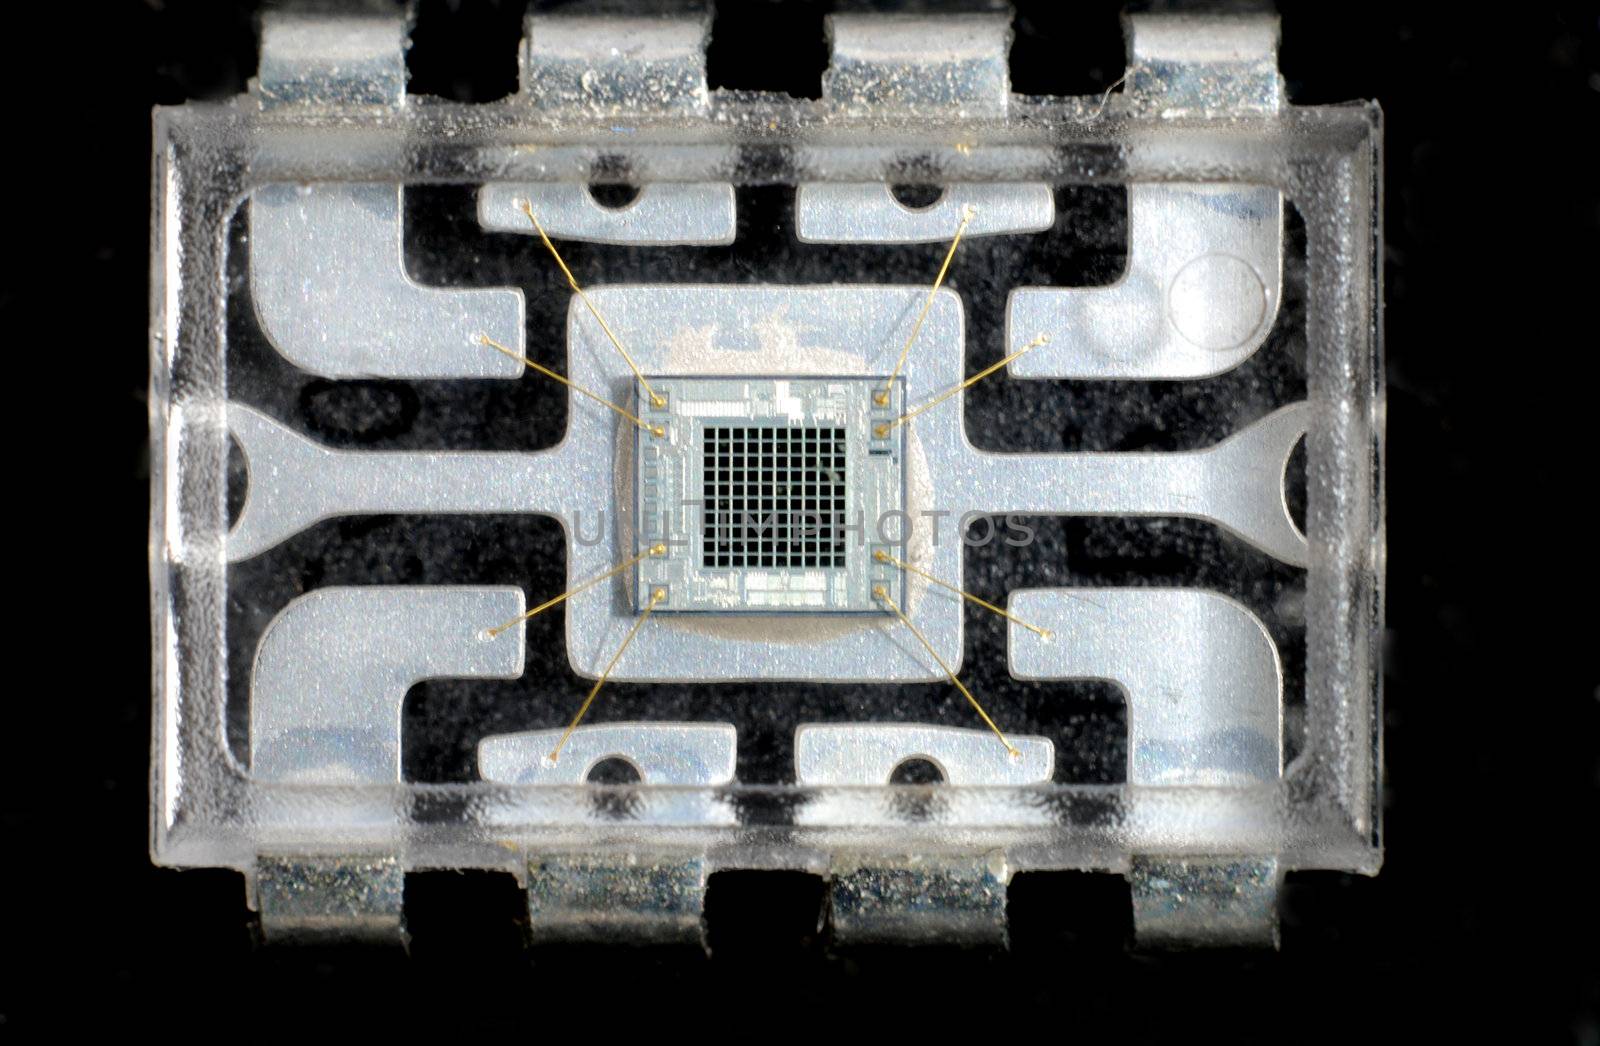 Close up stock pictures of the interior or a chip used in electronic devices